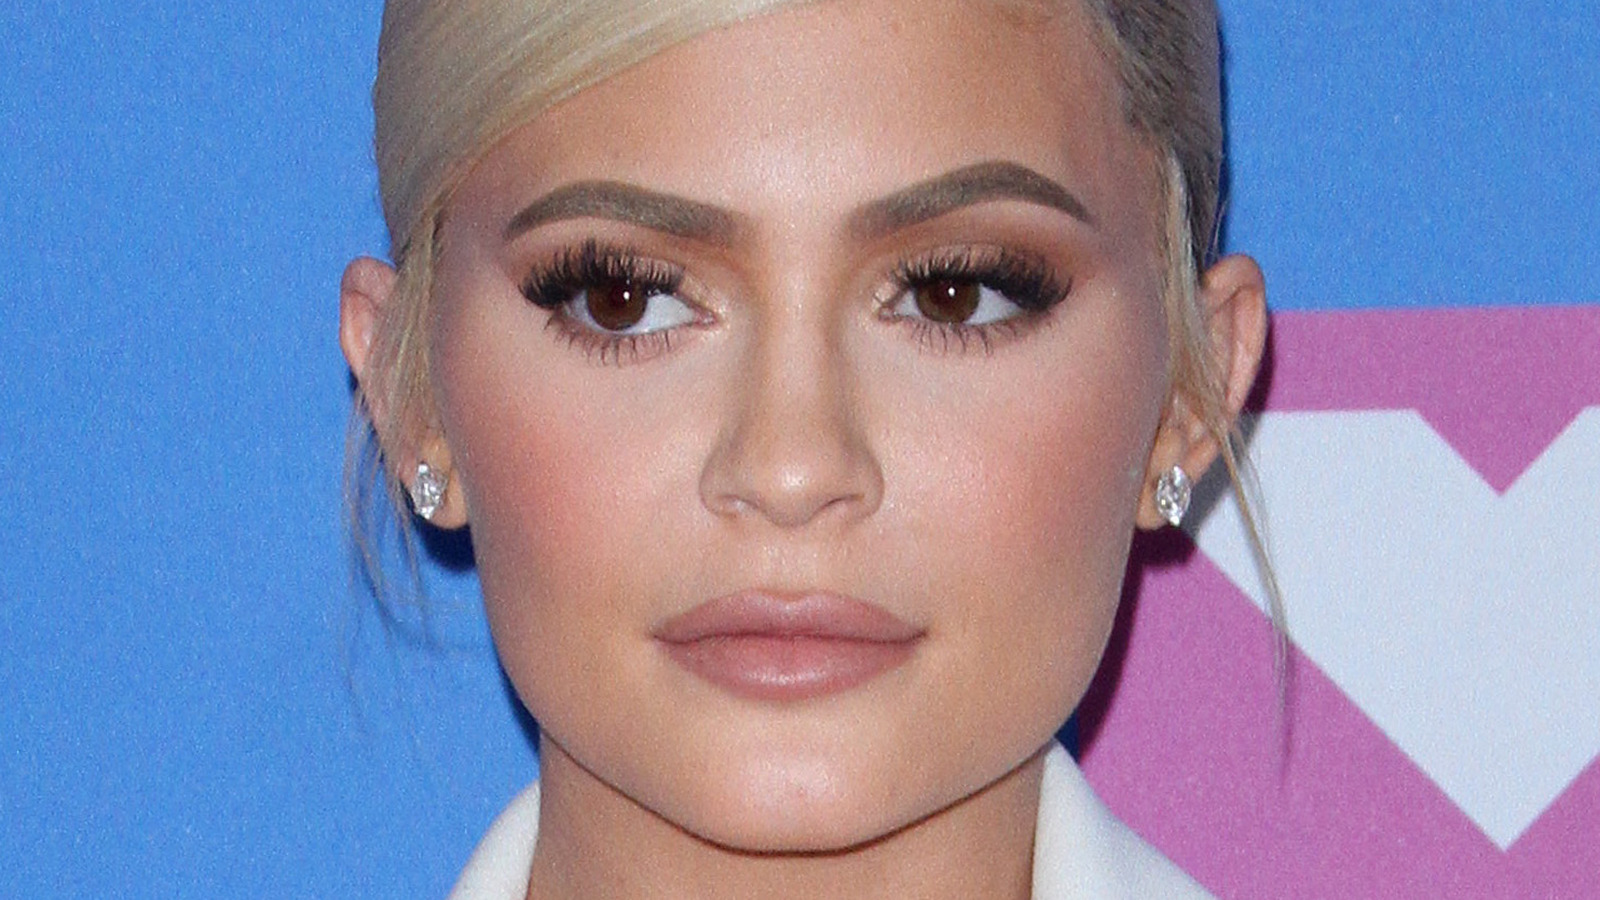 Of All Of Kylie Jenner's Blunders - This Stands Above The Rest